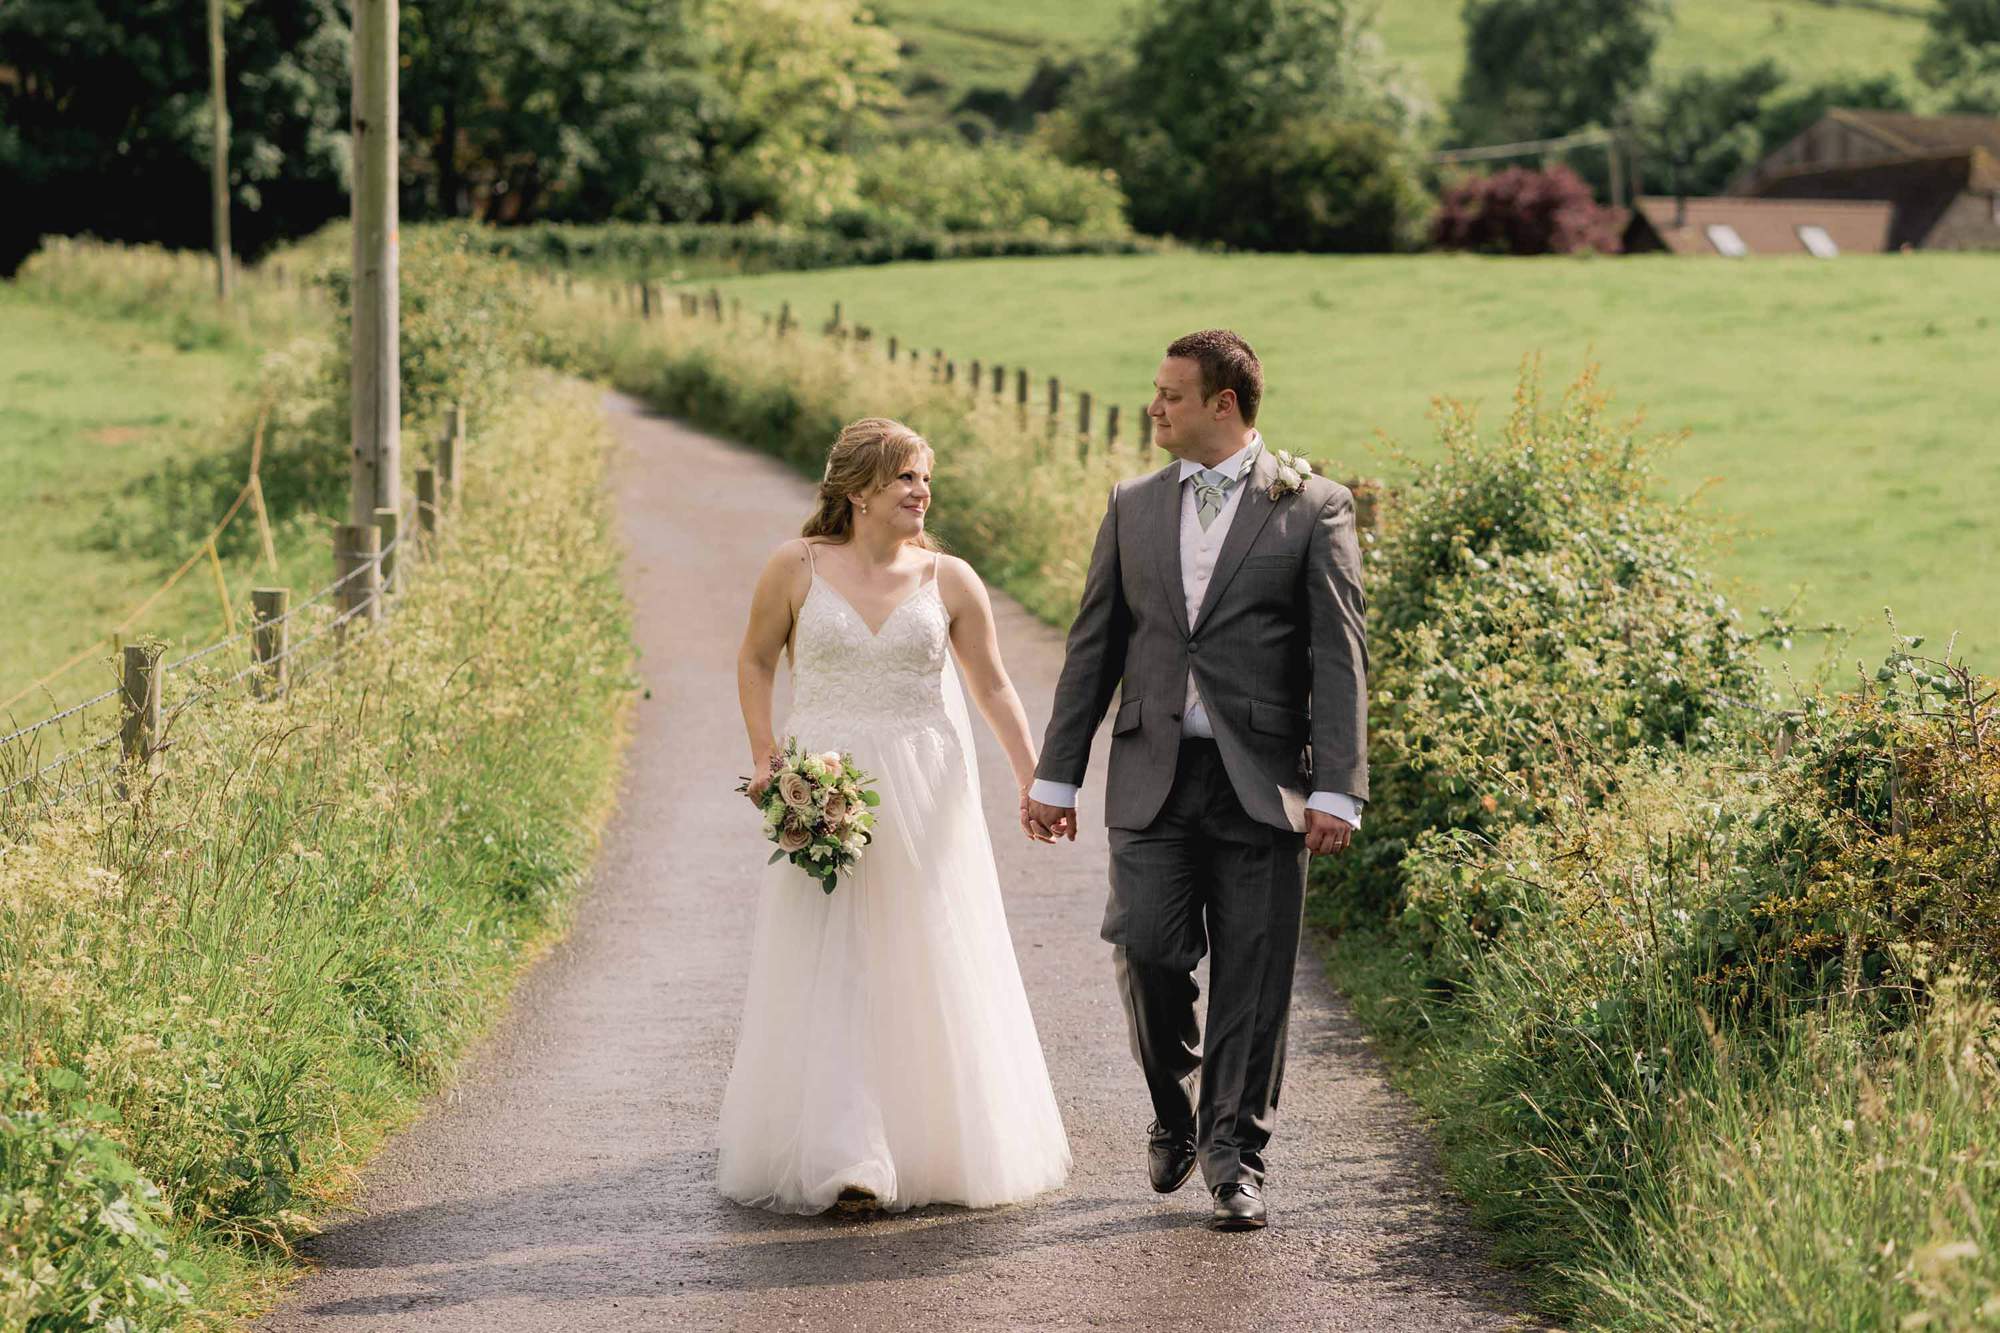 Bride and groom take a walk at Tottington Manor in the hills.